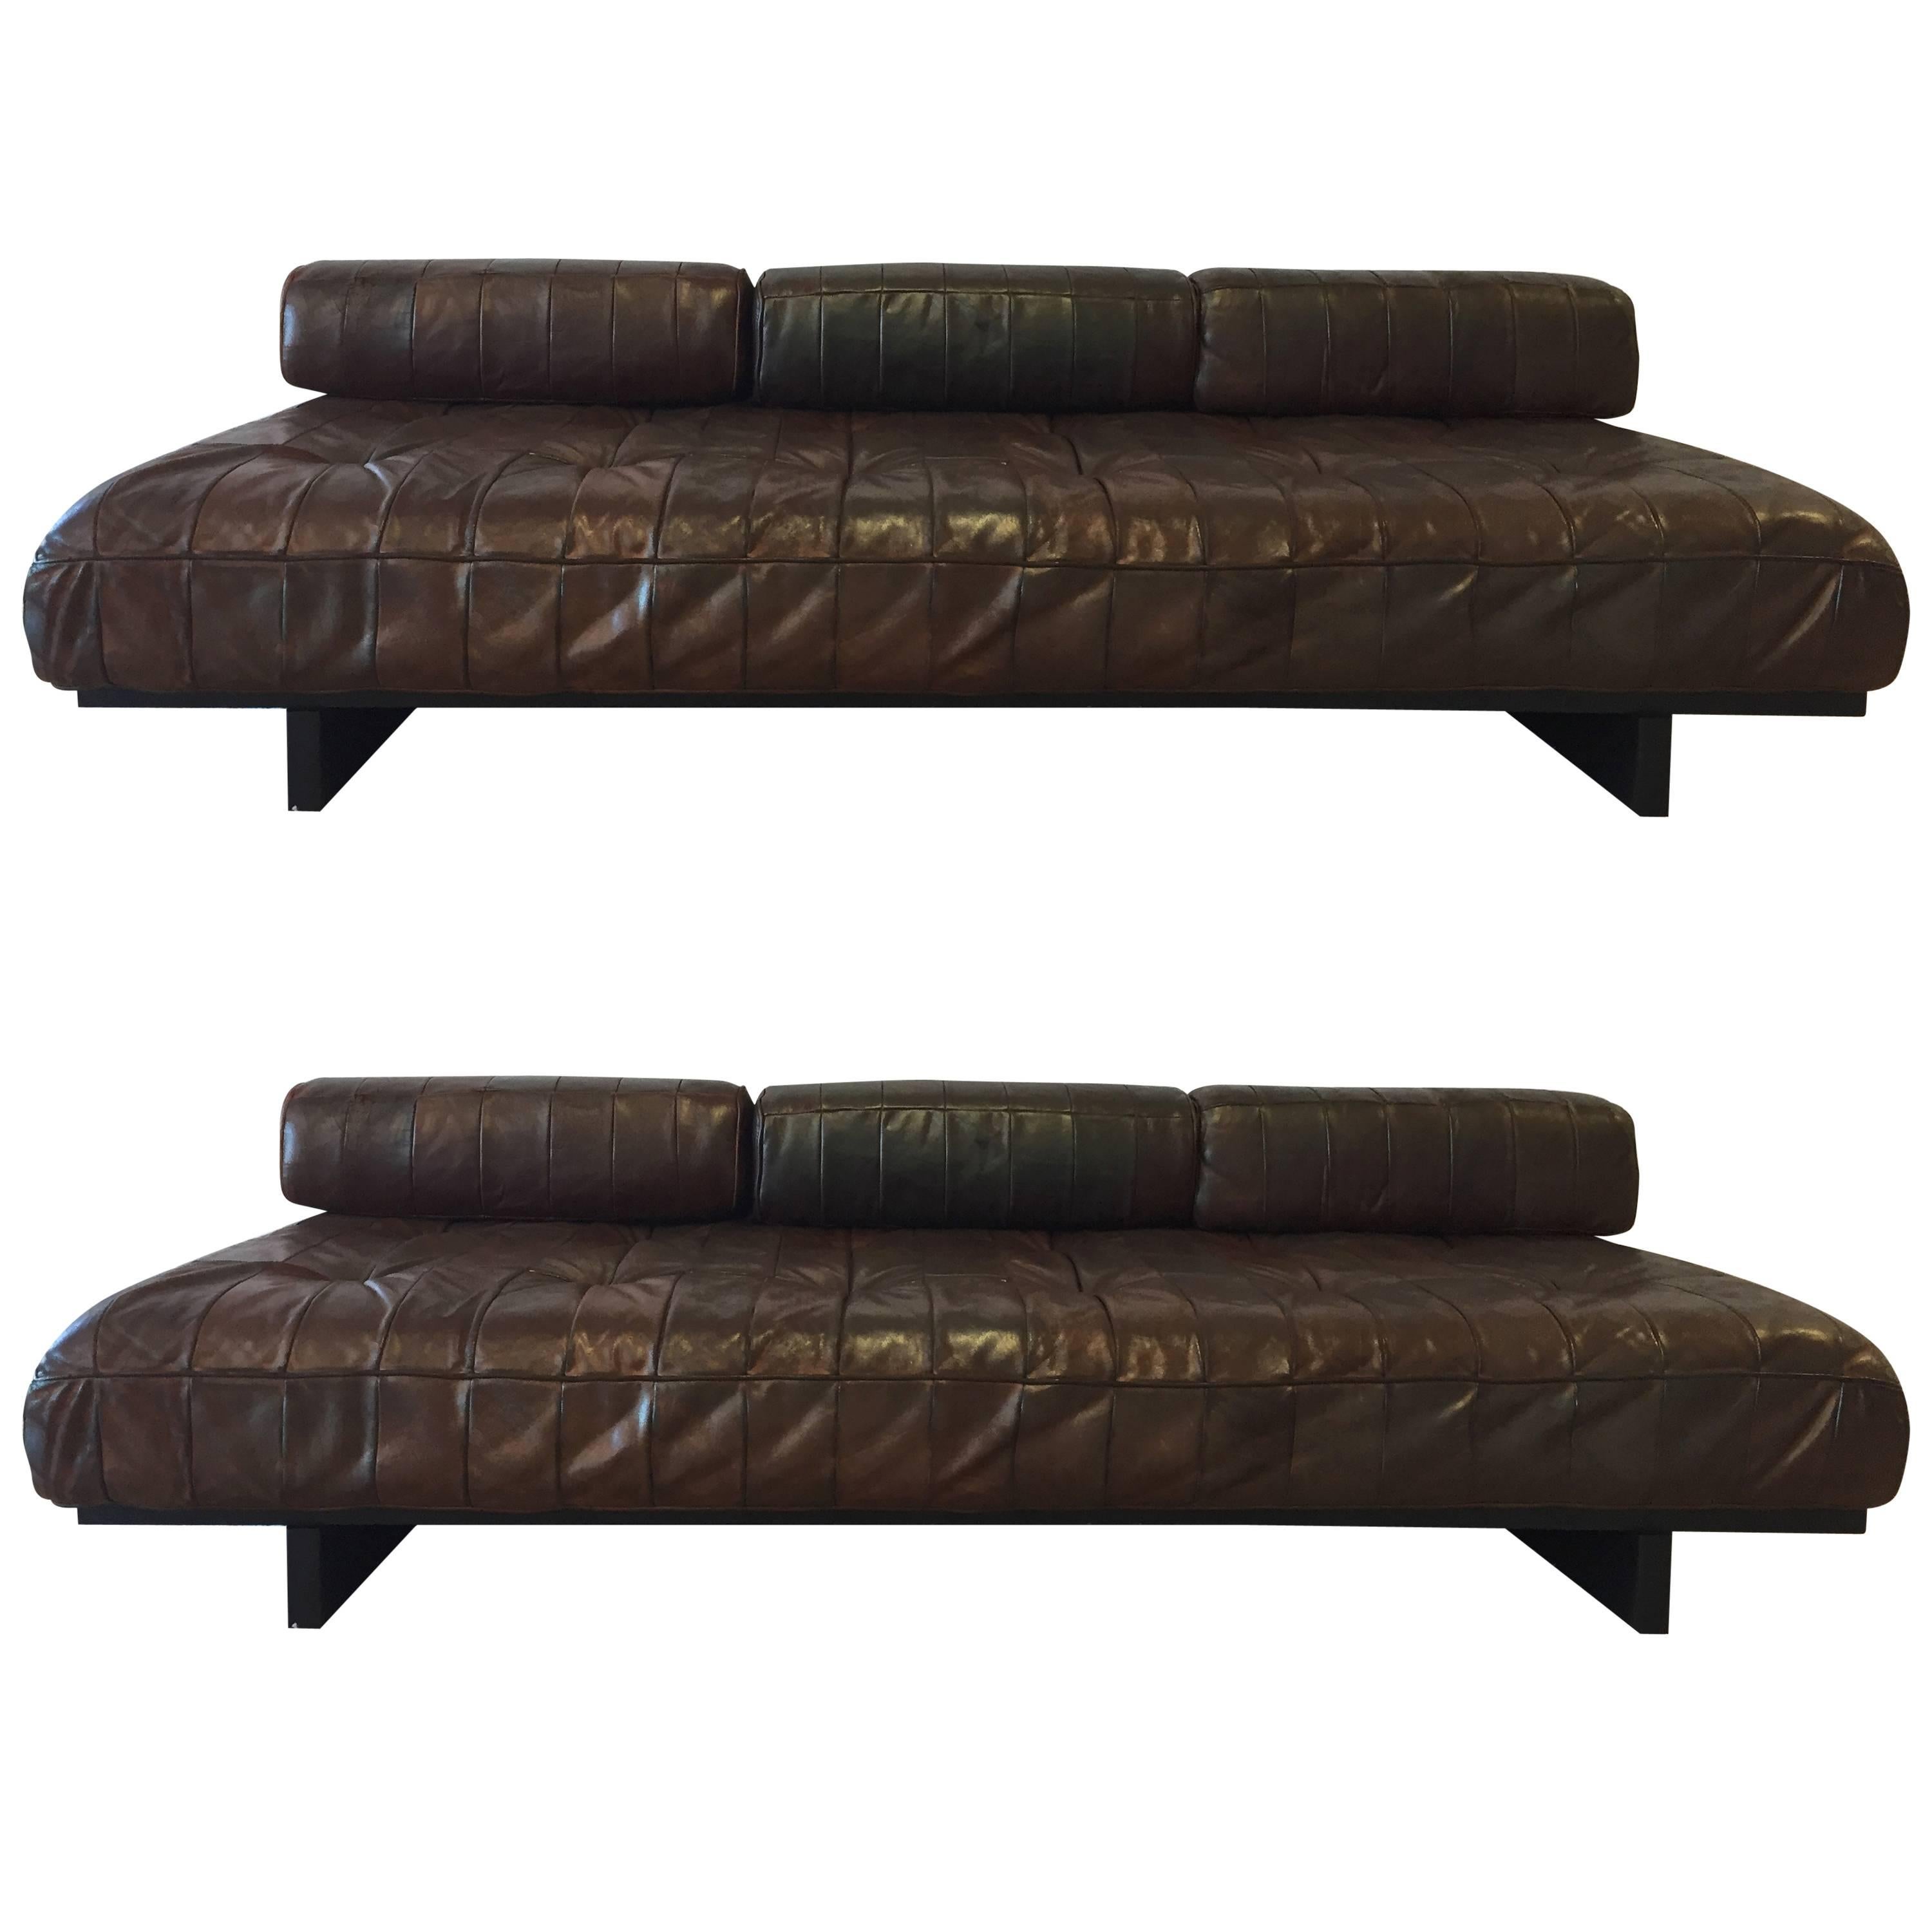 Pair of De Sede Ds-80 Daybed Leather Sofas